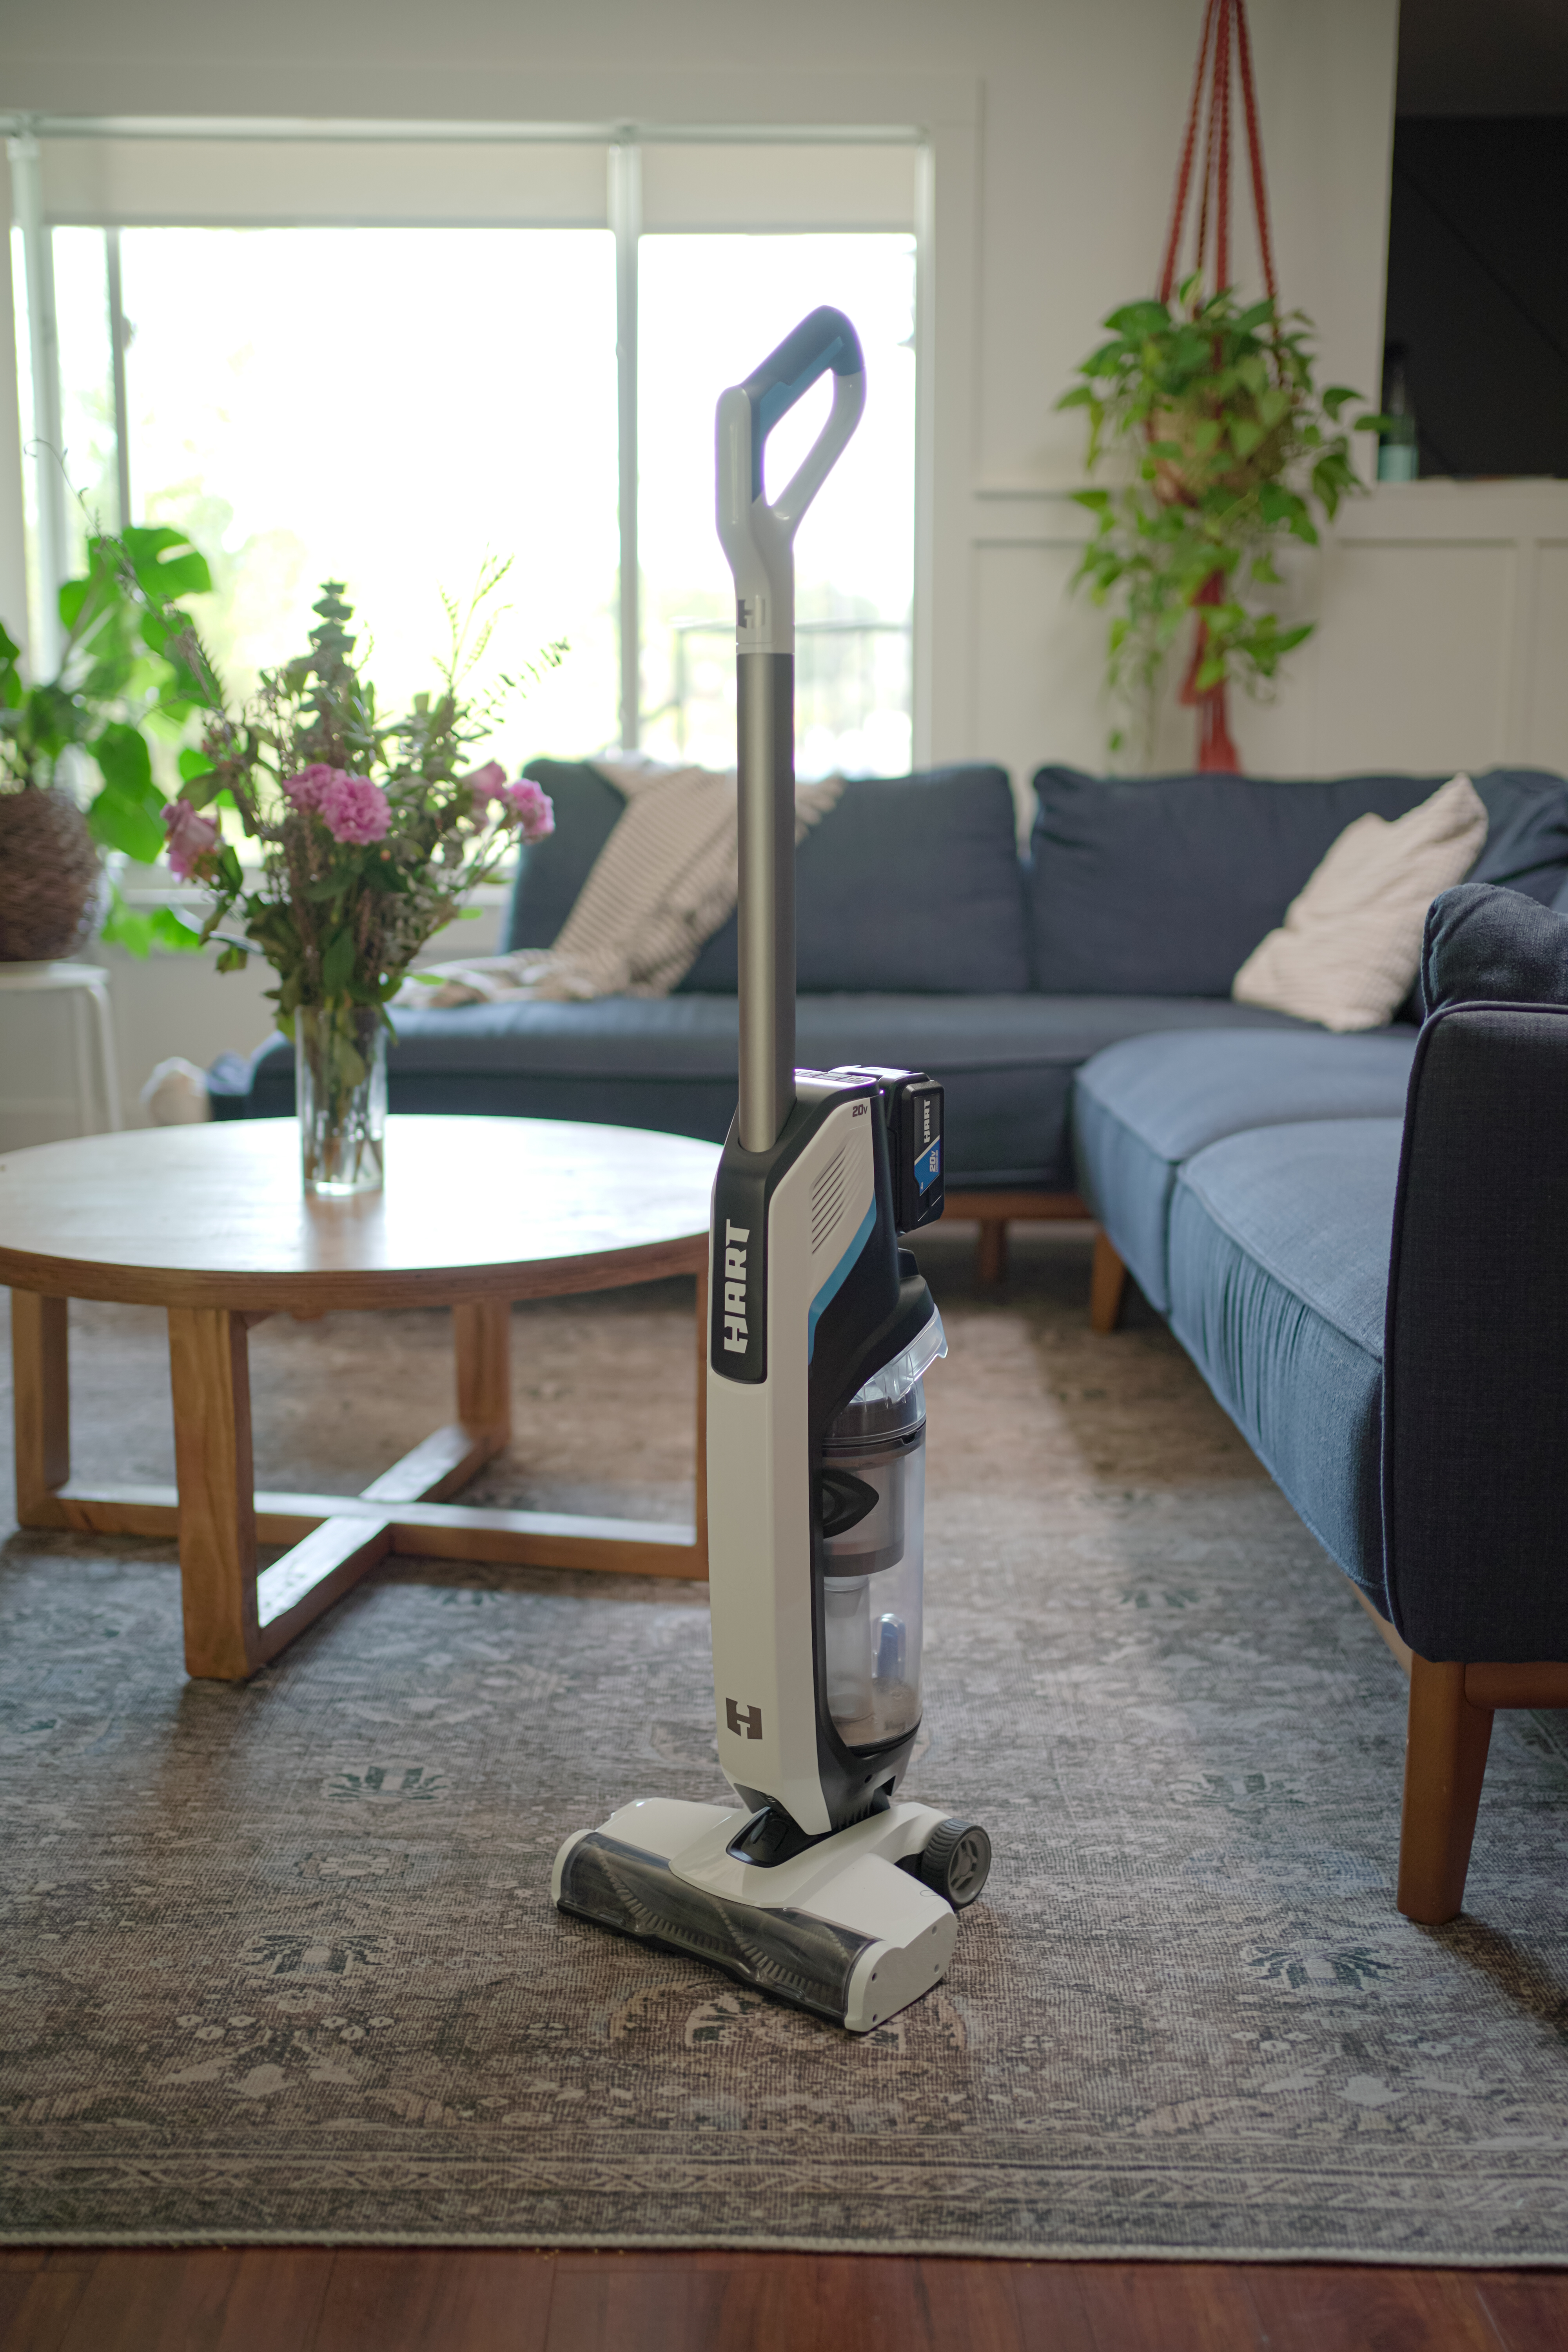 20V Cordless High Capacity Stick Vacuum (Battery and Charger Not Included)